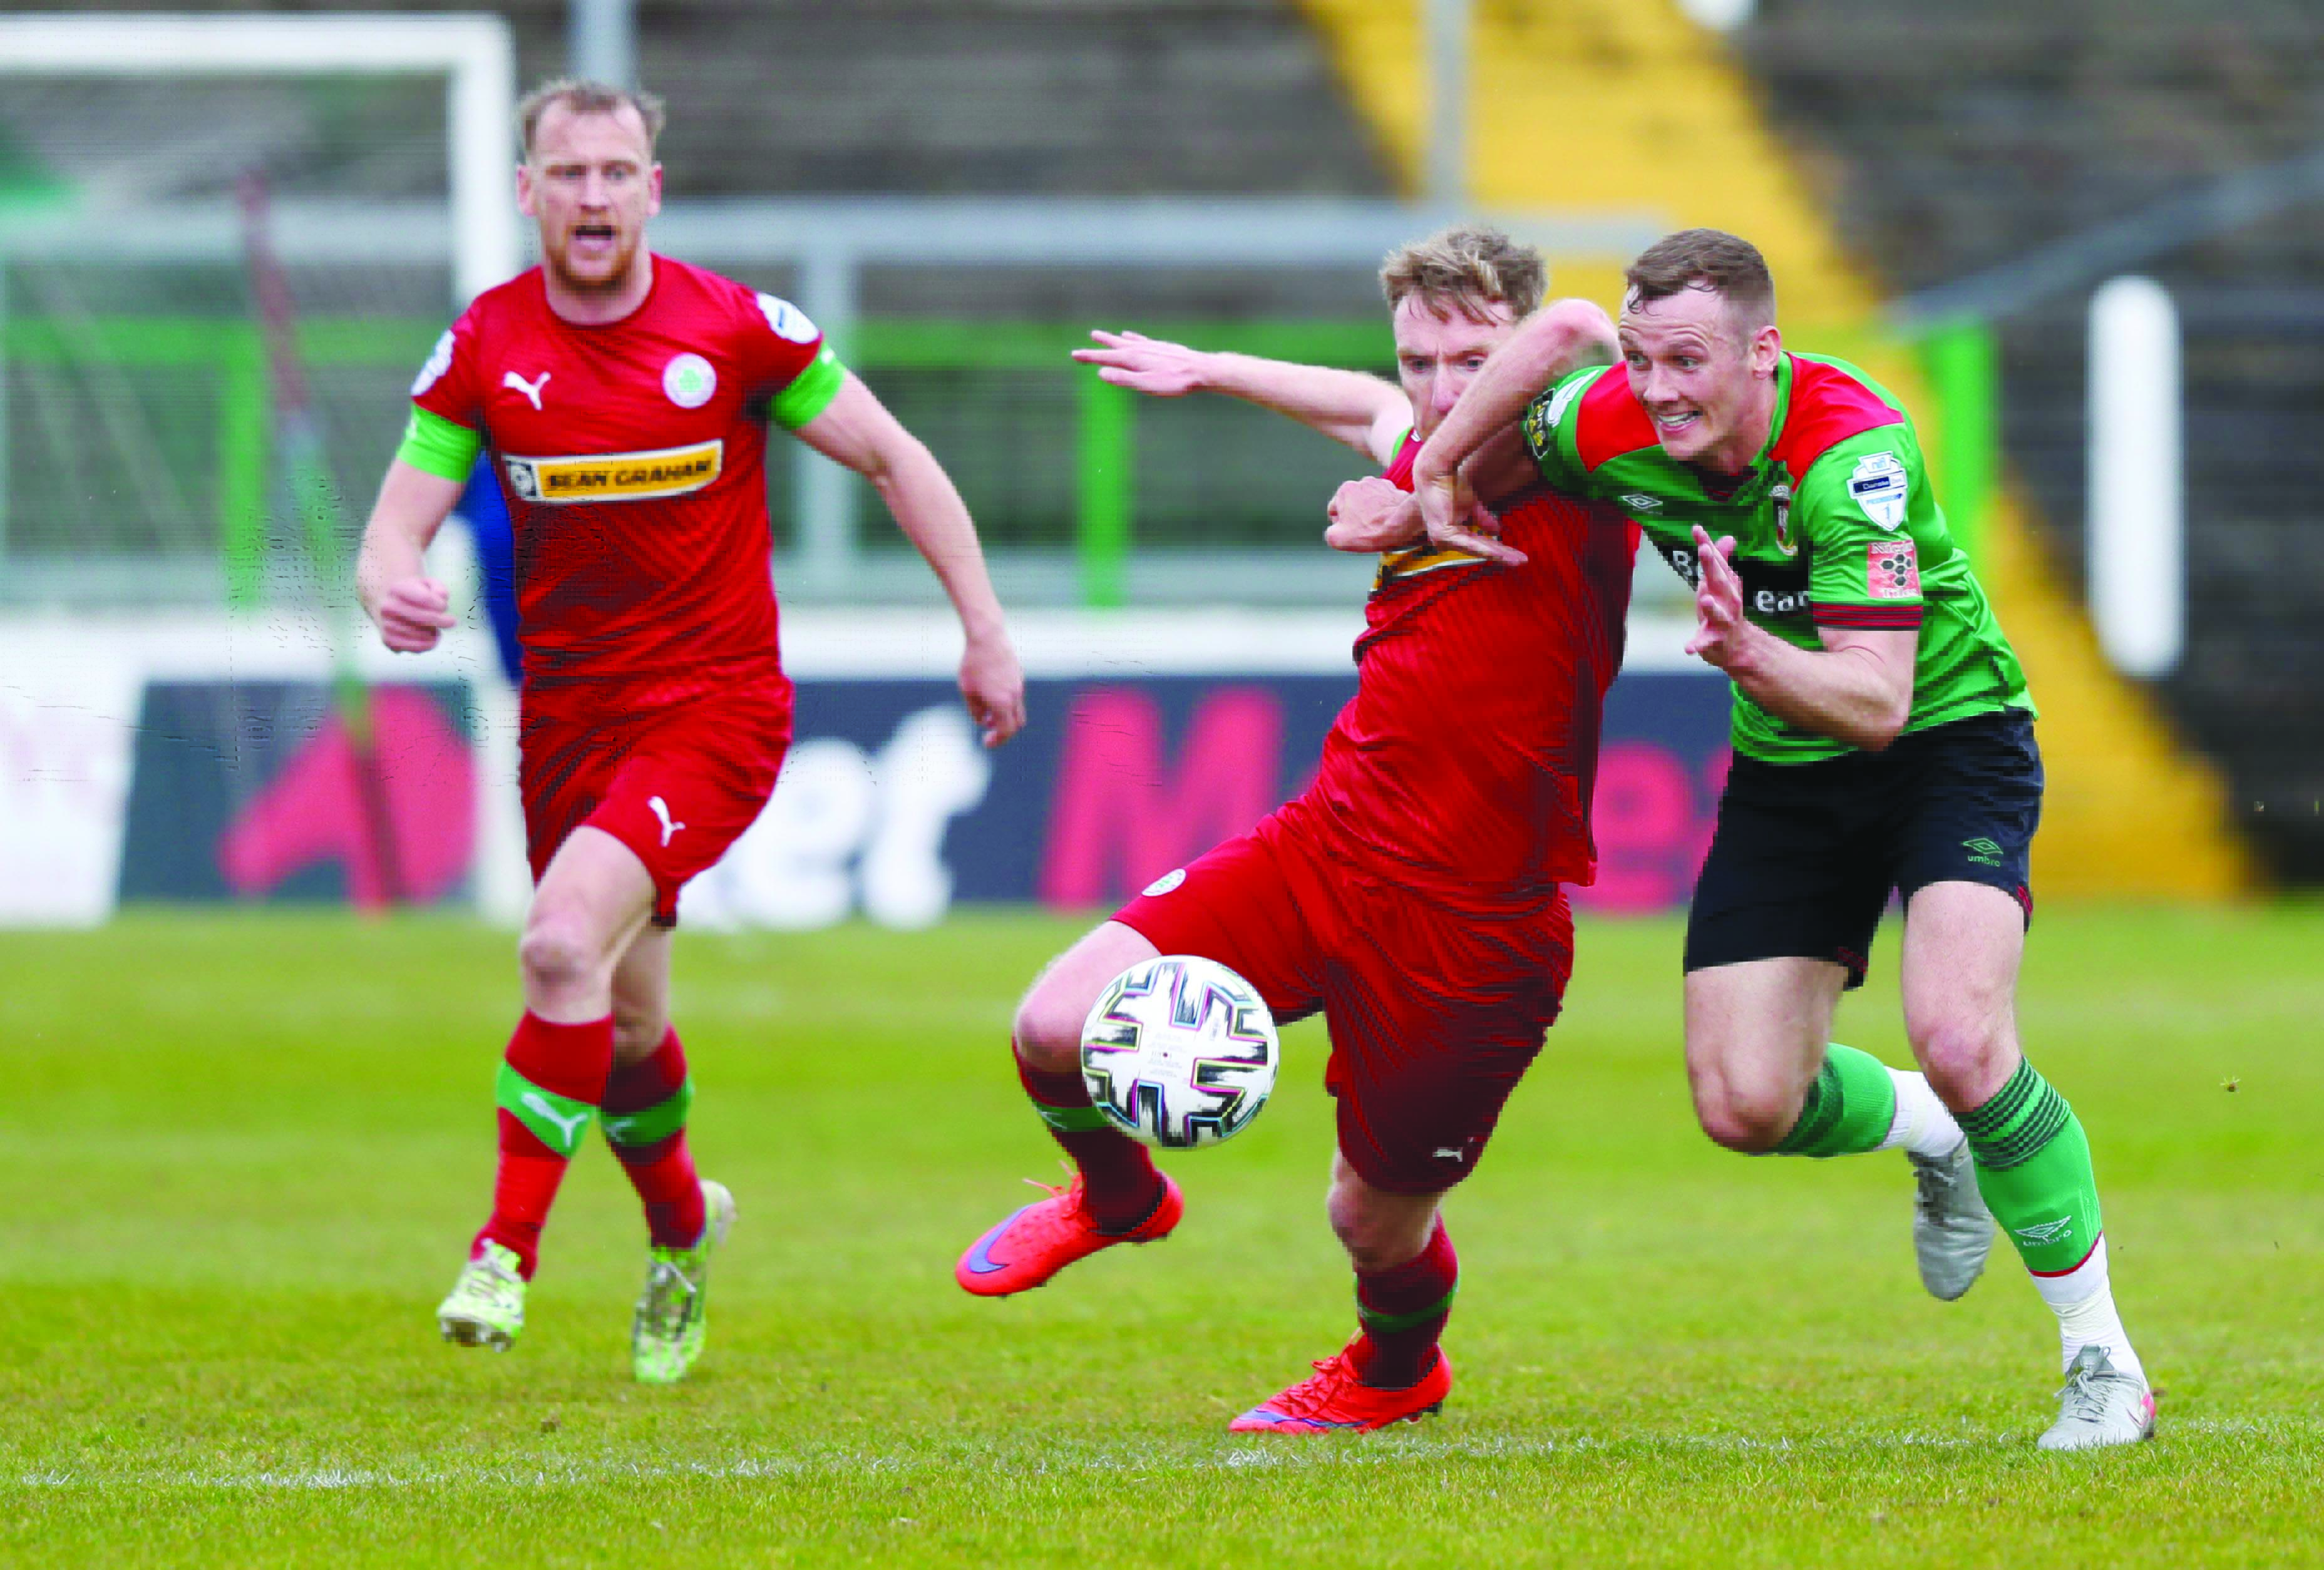 Cliftonville return to The Oval to face Glentoran this Saturday having lost out to the East Belfast club in the Irish Cup last week